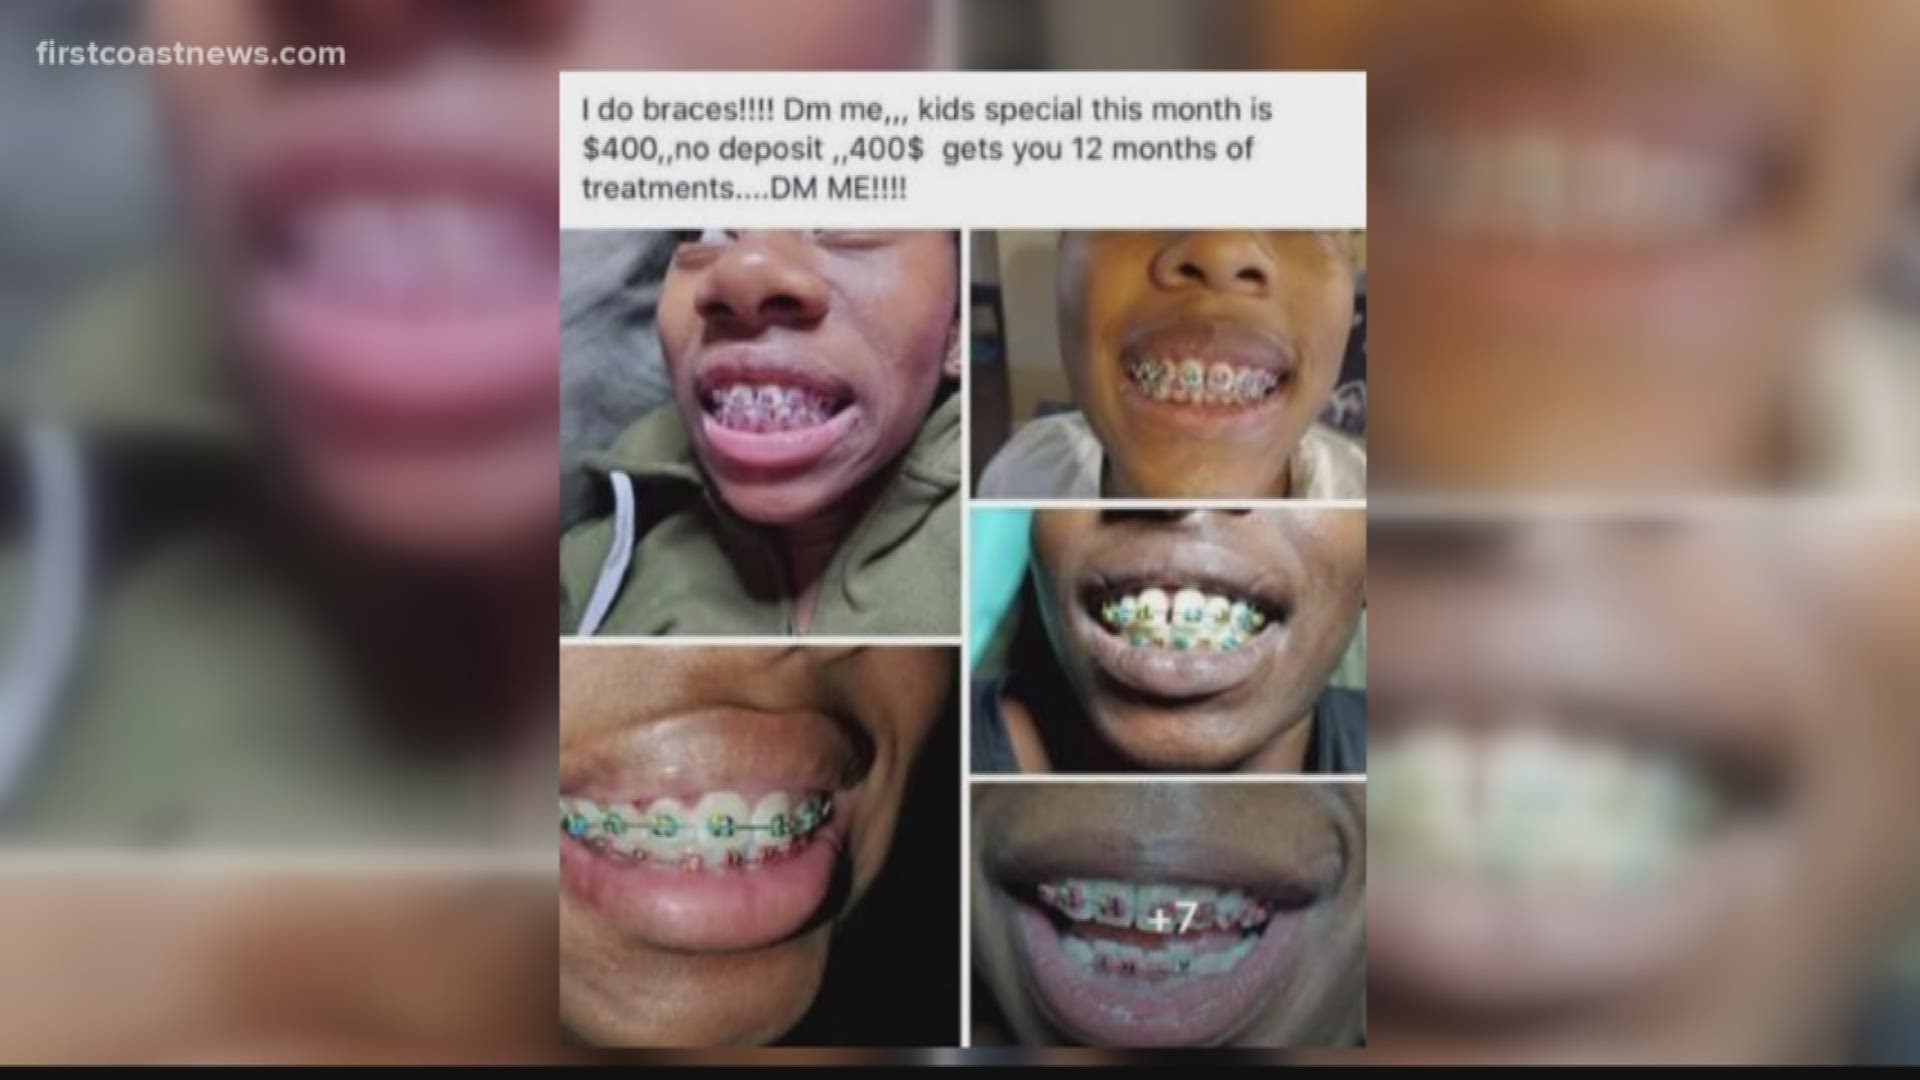 First Coast doctors are warning parents to be aware of a woman's offer to fit braces for $400 from home, citing health and safety reasons.